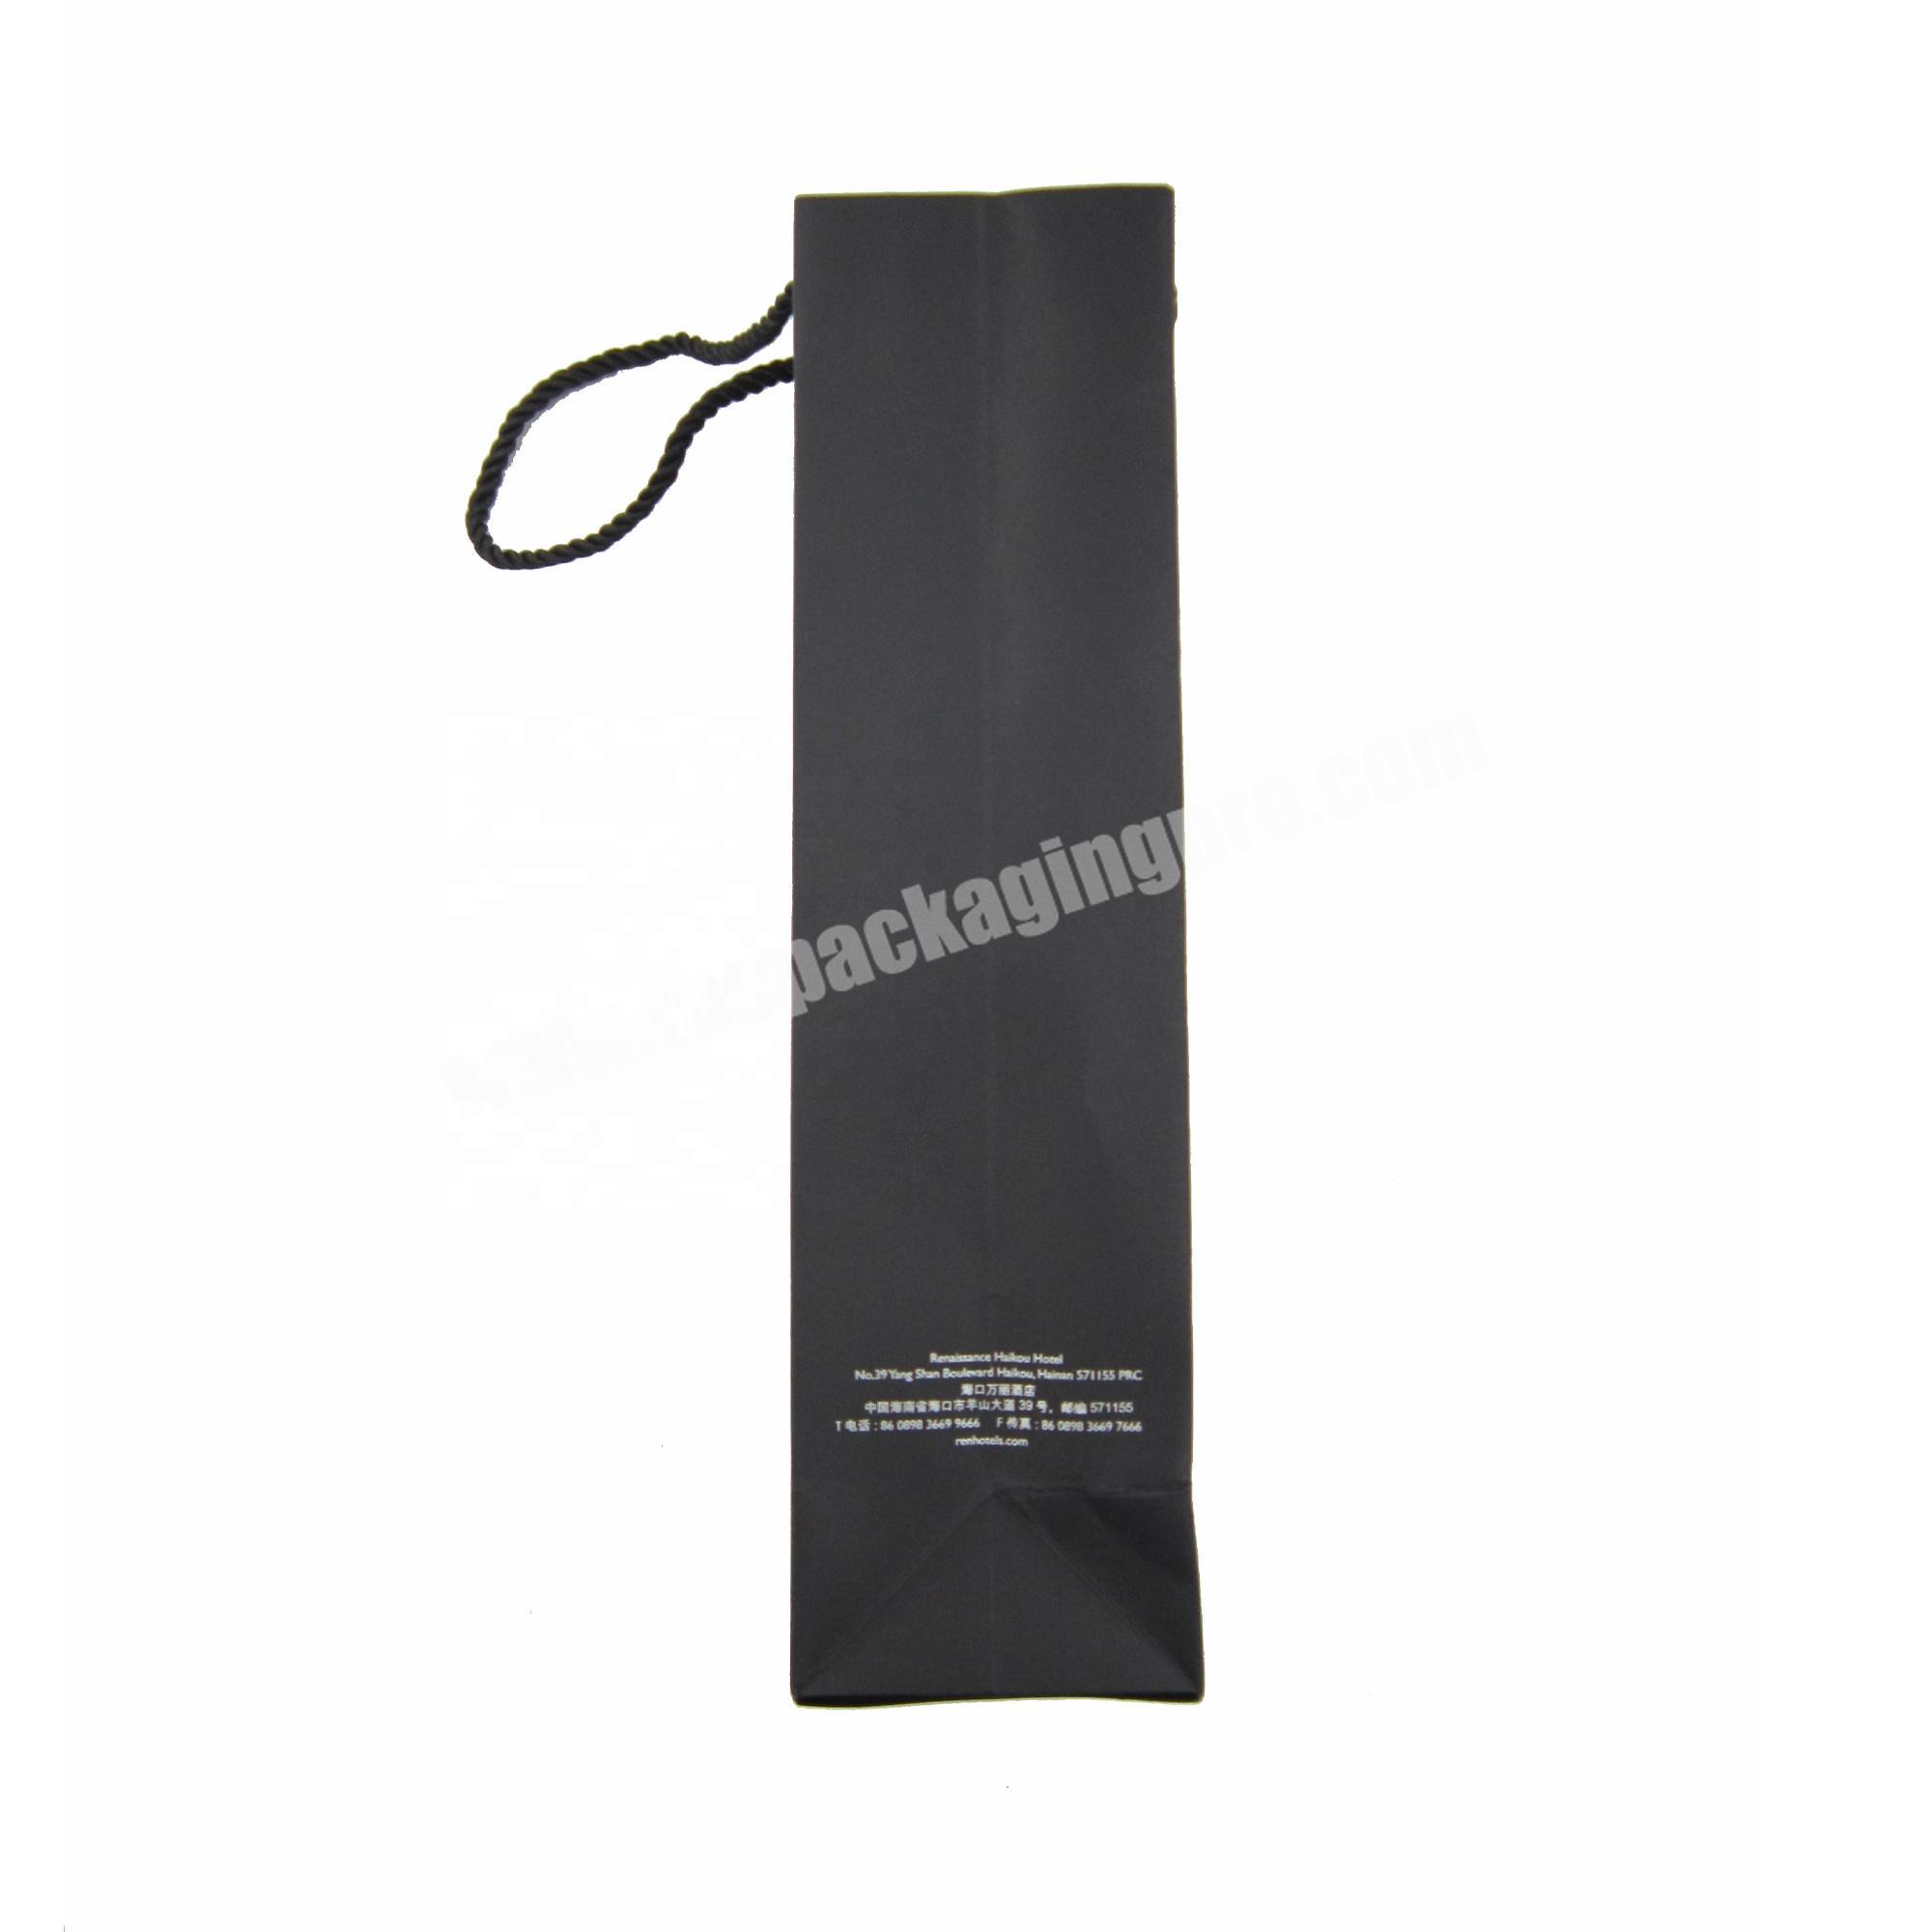 Small Gloss Craft Paper Bags Black Retail Shopping Paper Bag